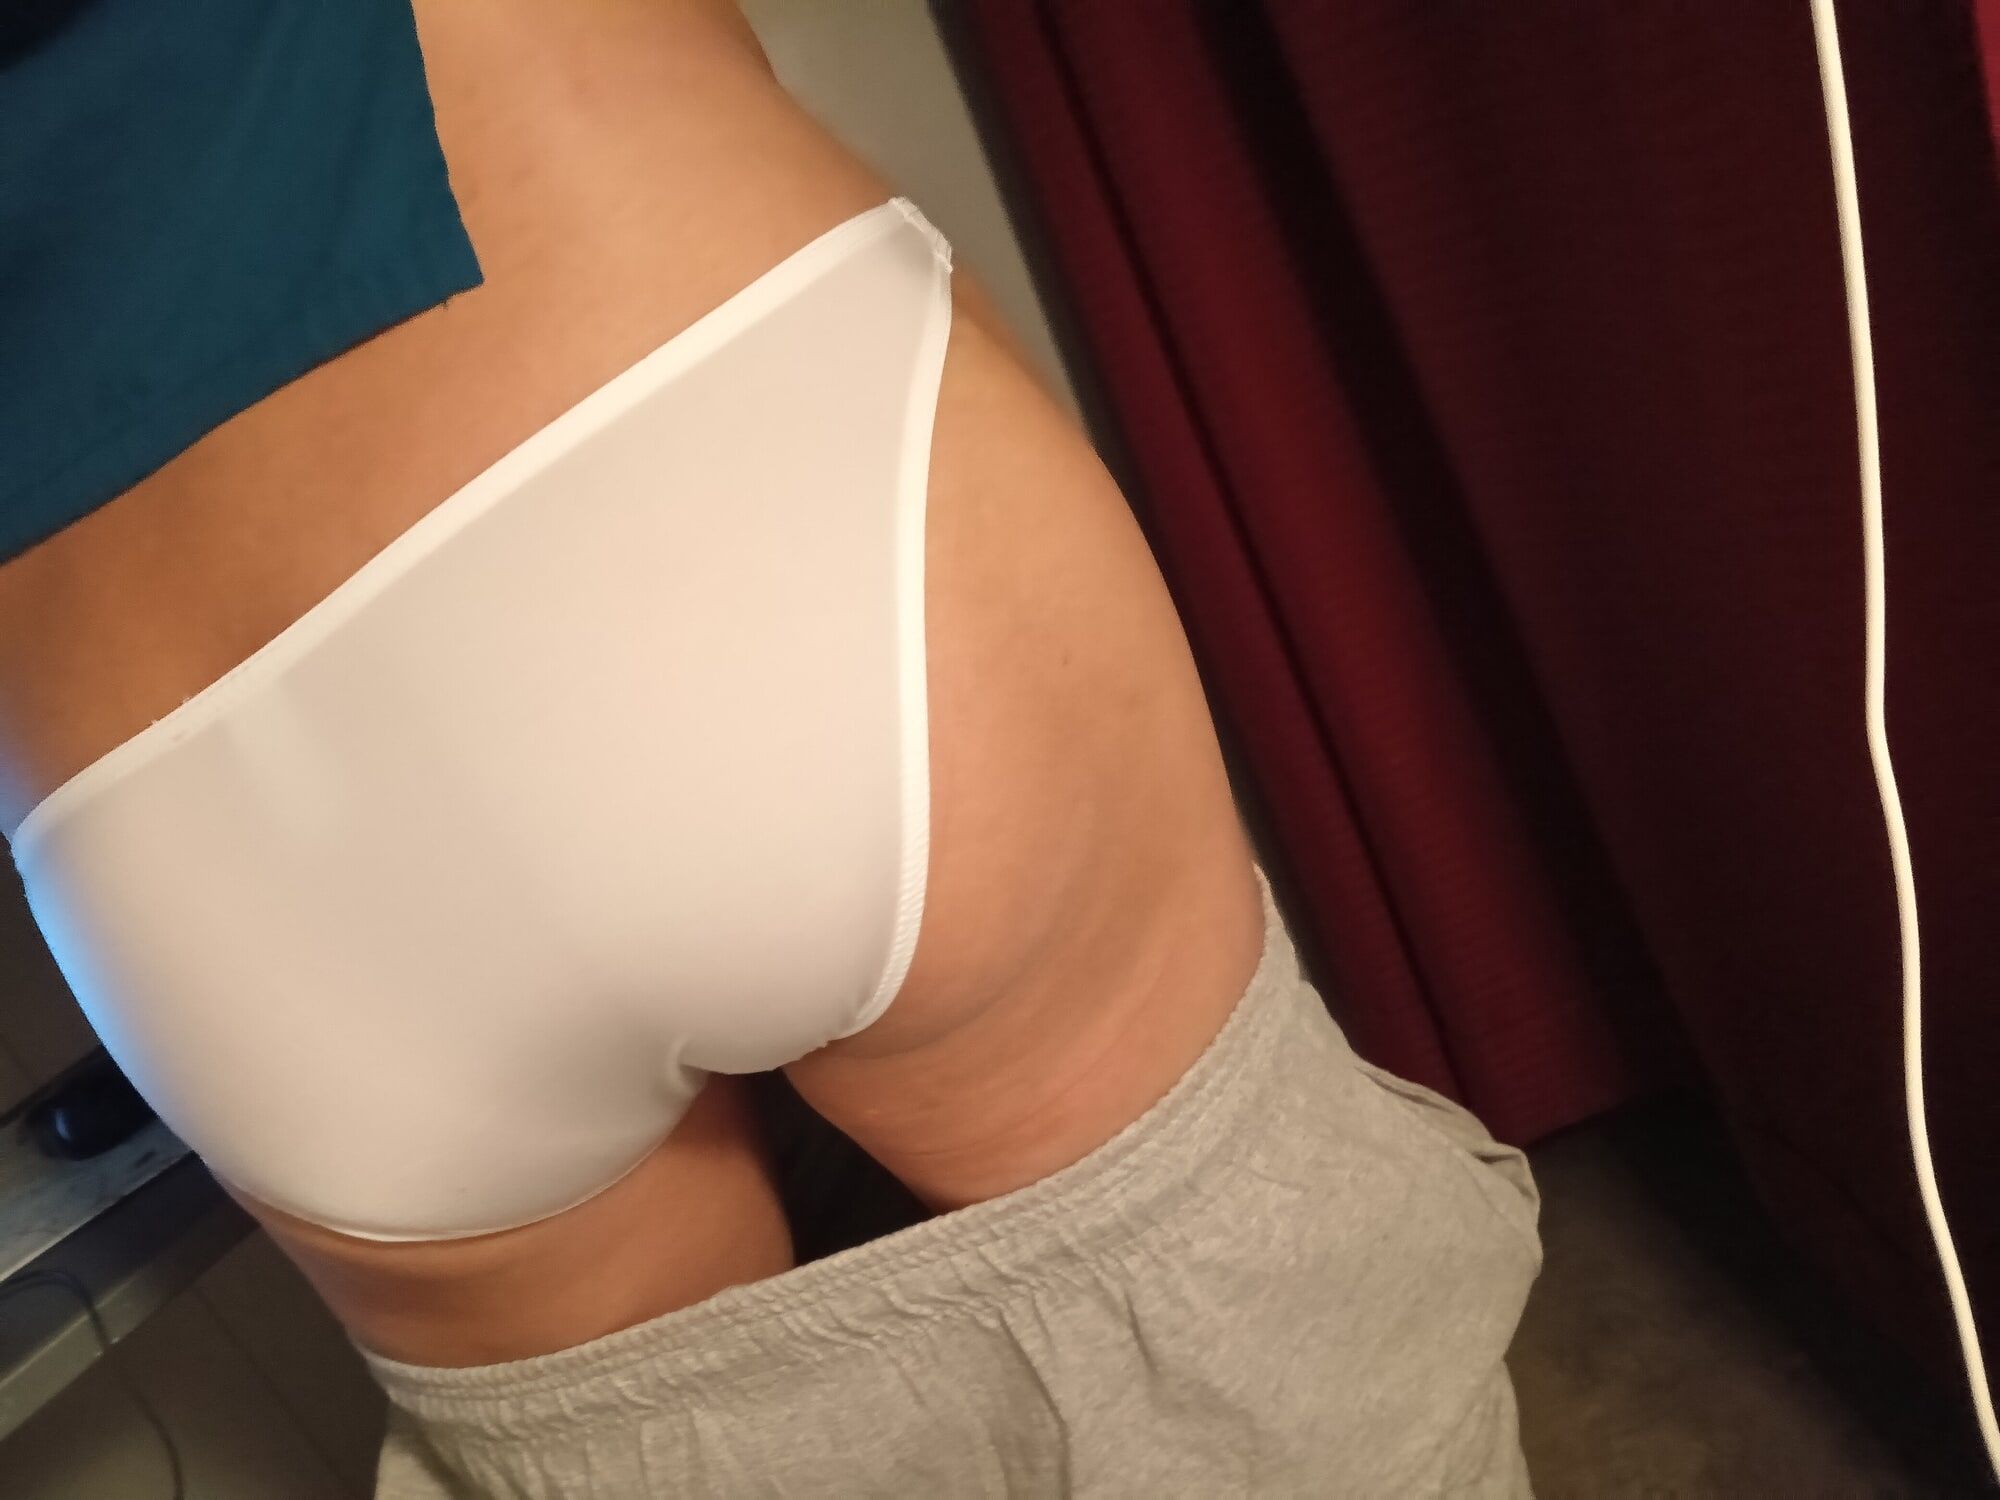 Hot asian gay showing off his tight butt wearing shorts and  #18